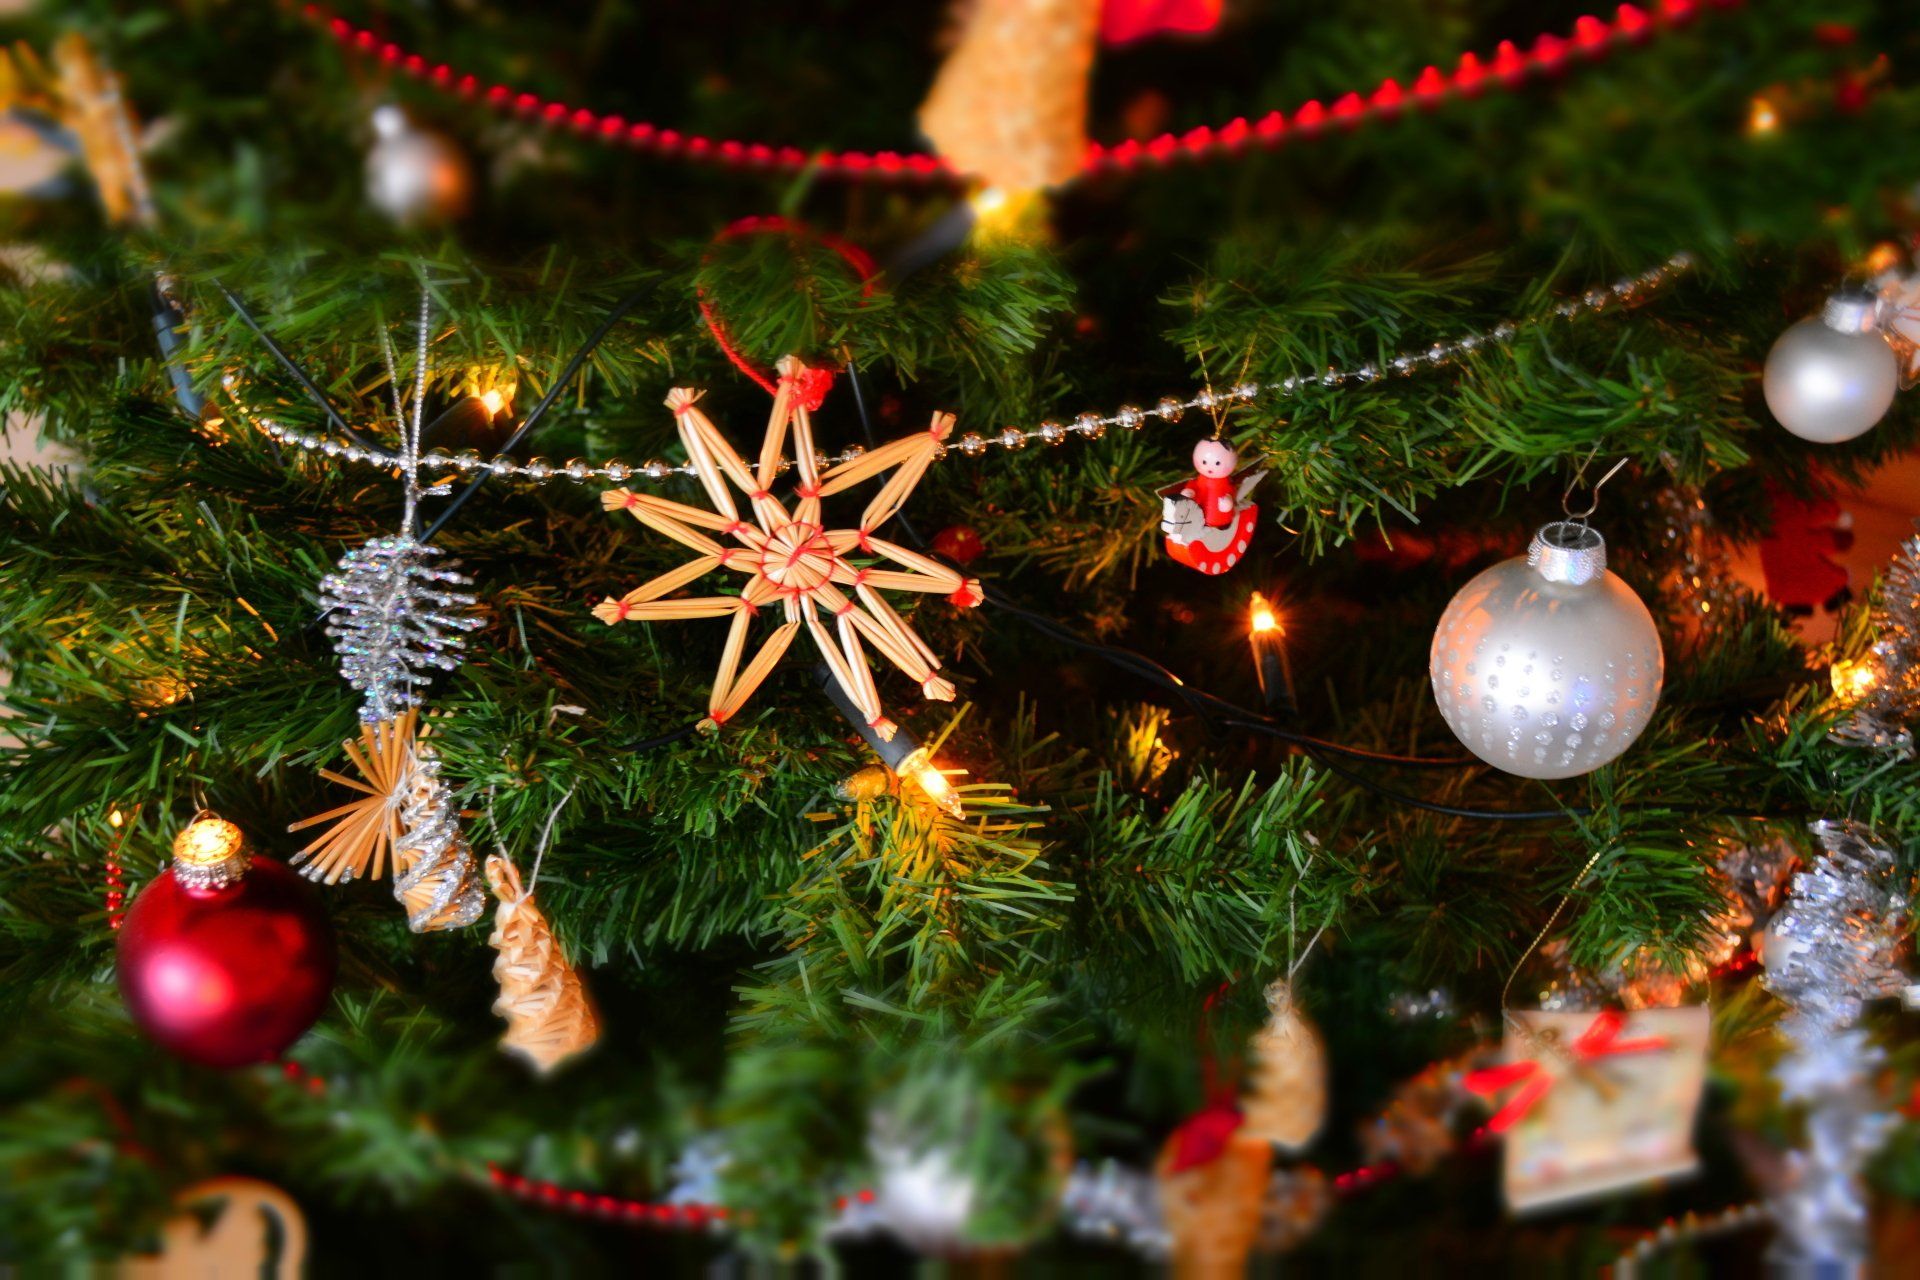 Christmas tree with various ornaments